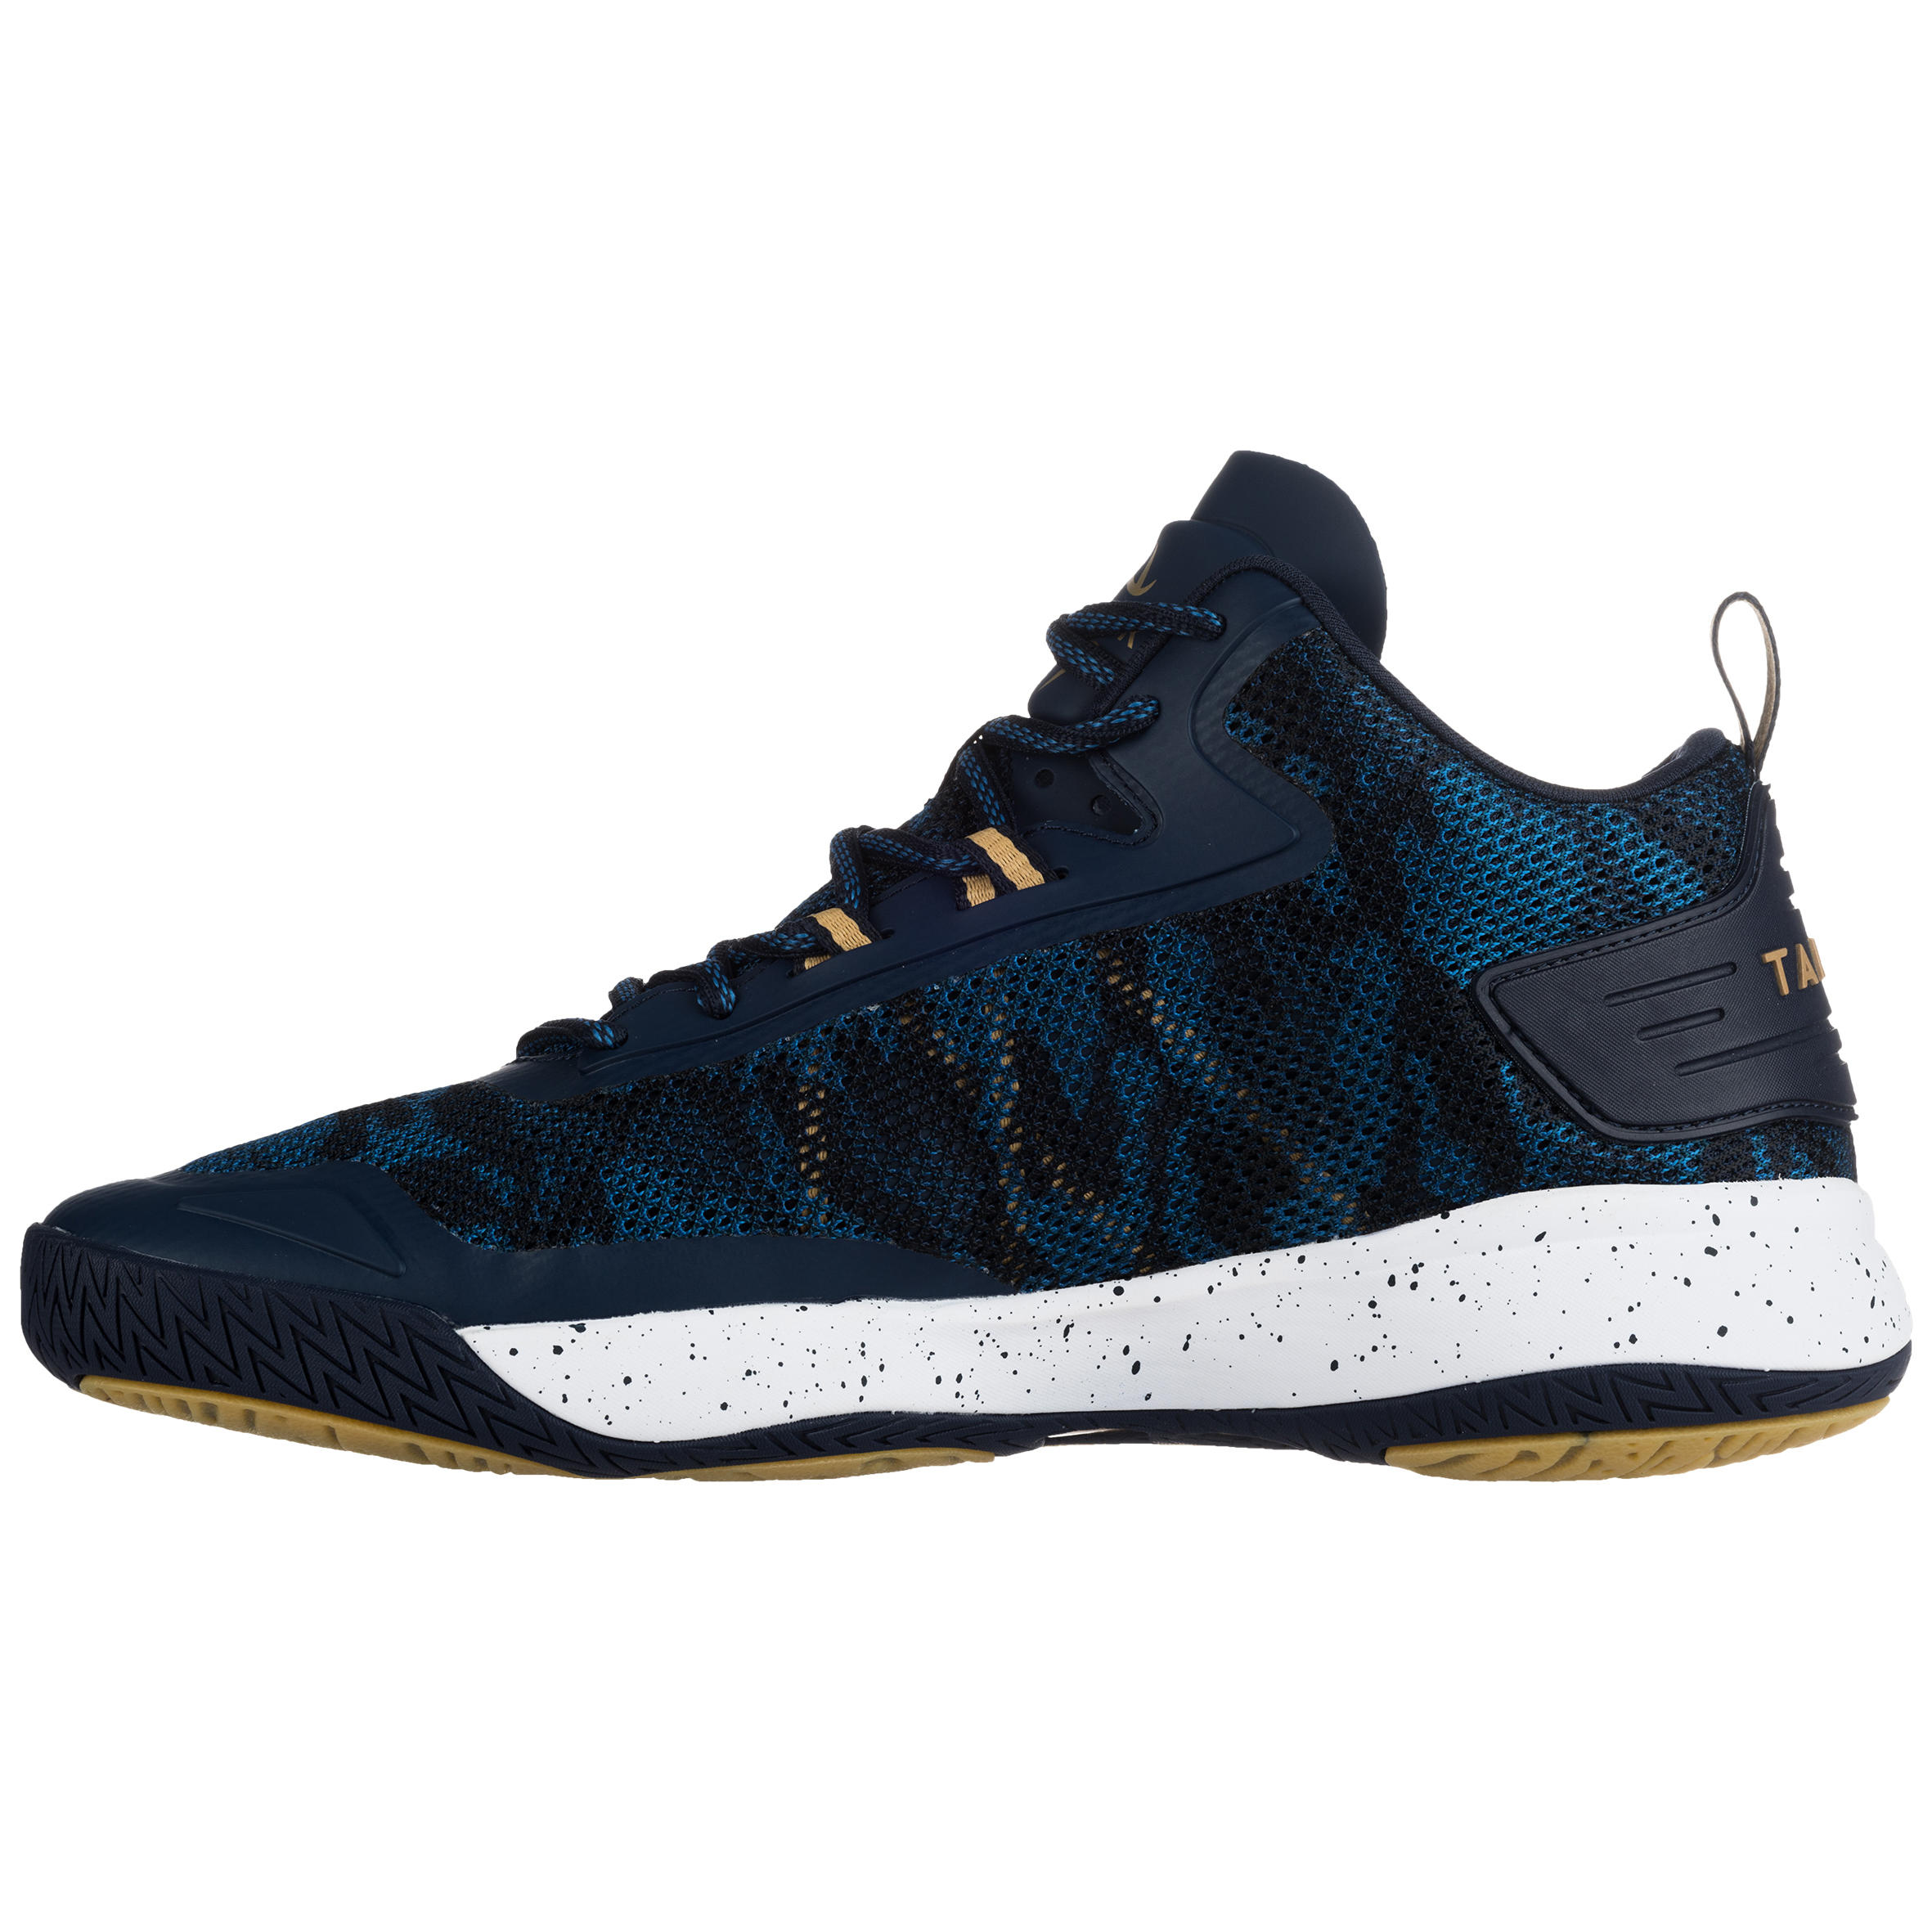 blue and gold basketball shoes